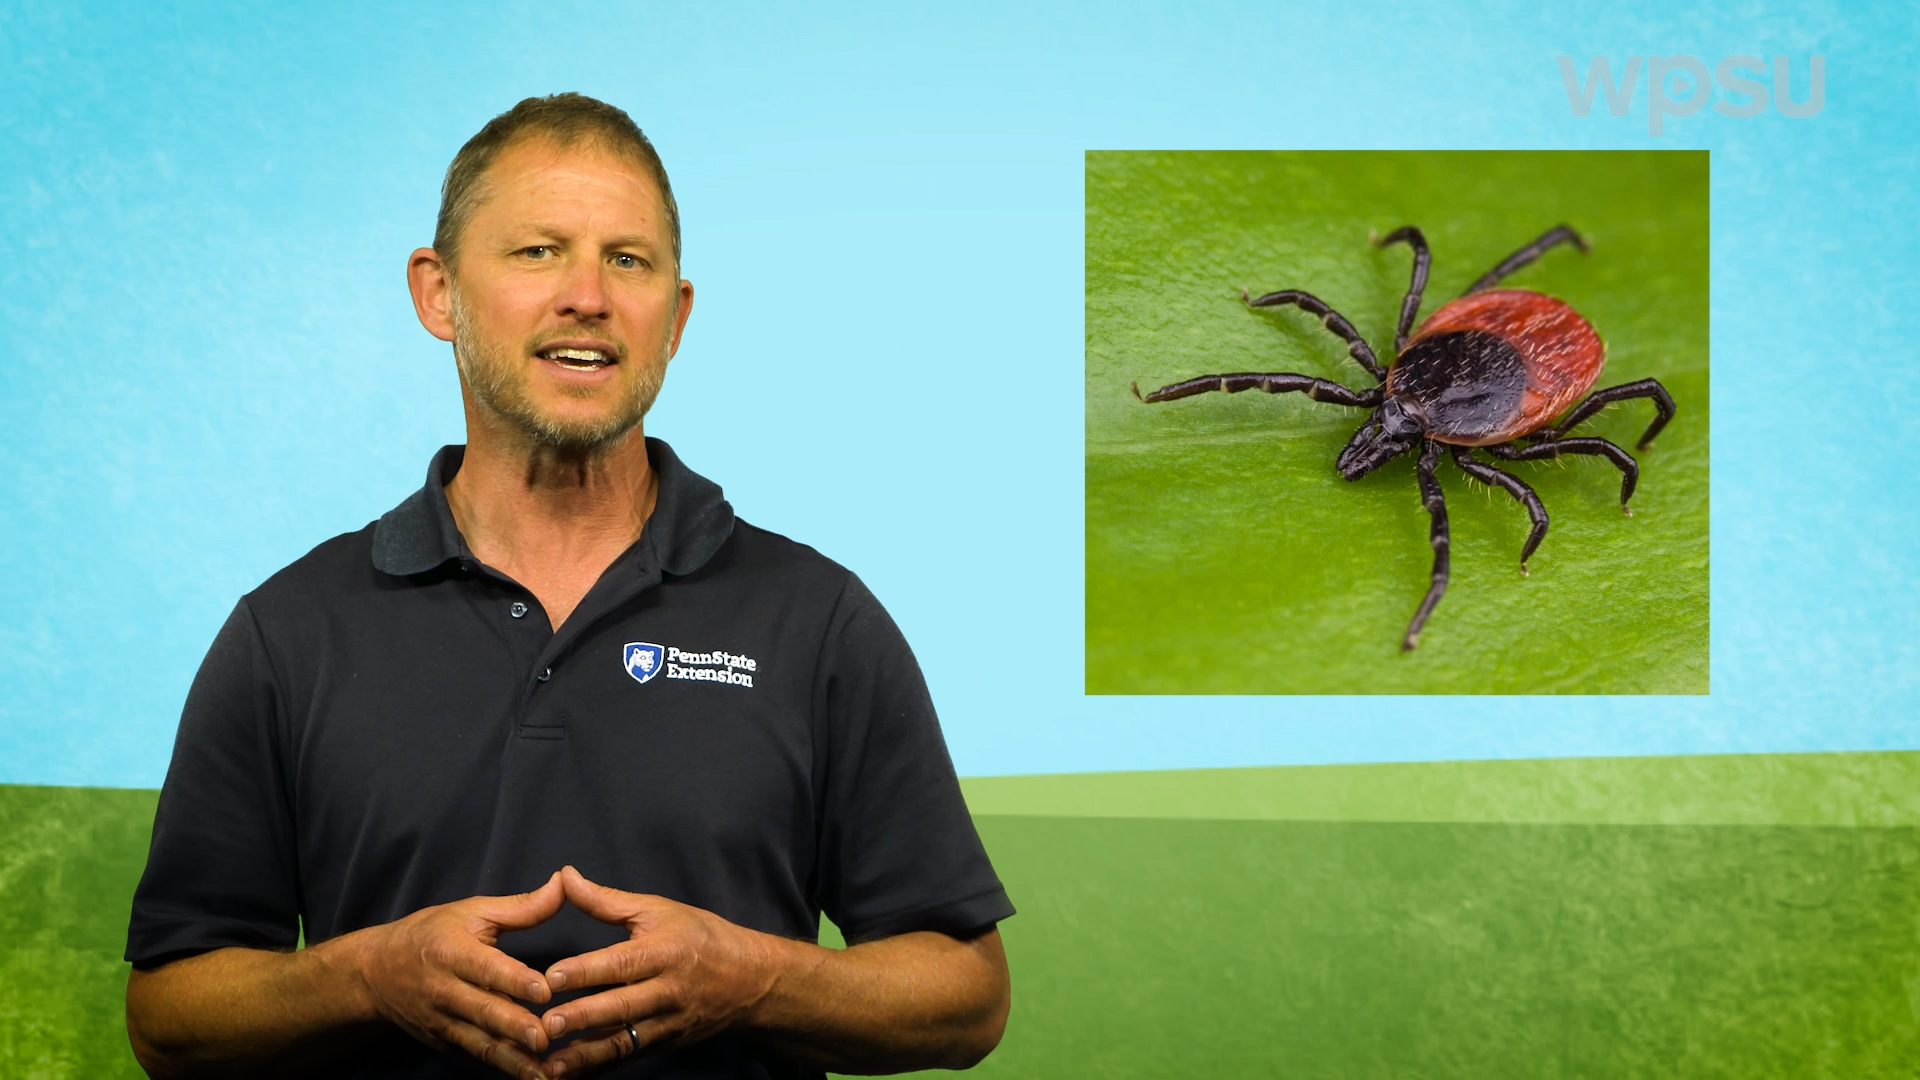 Year-Round Gardening host Tom Butzler standing next to an enlarged image of a tick.